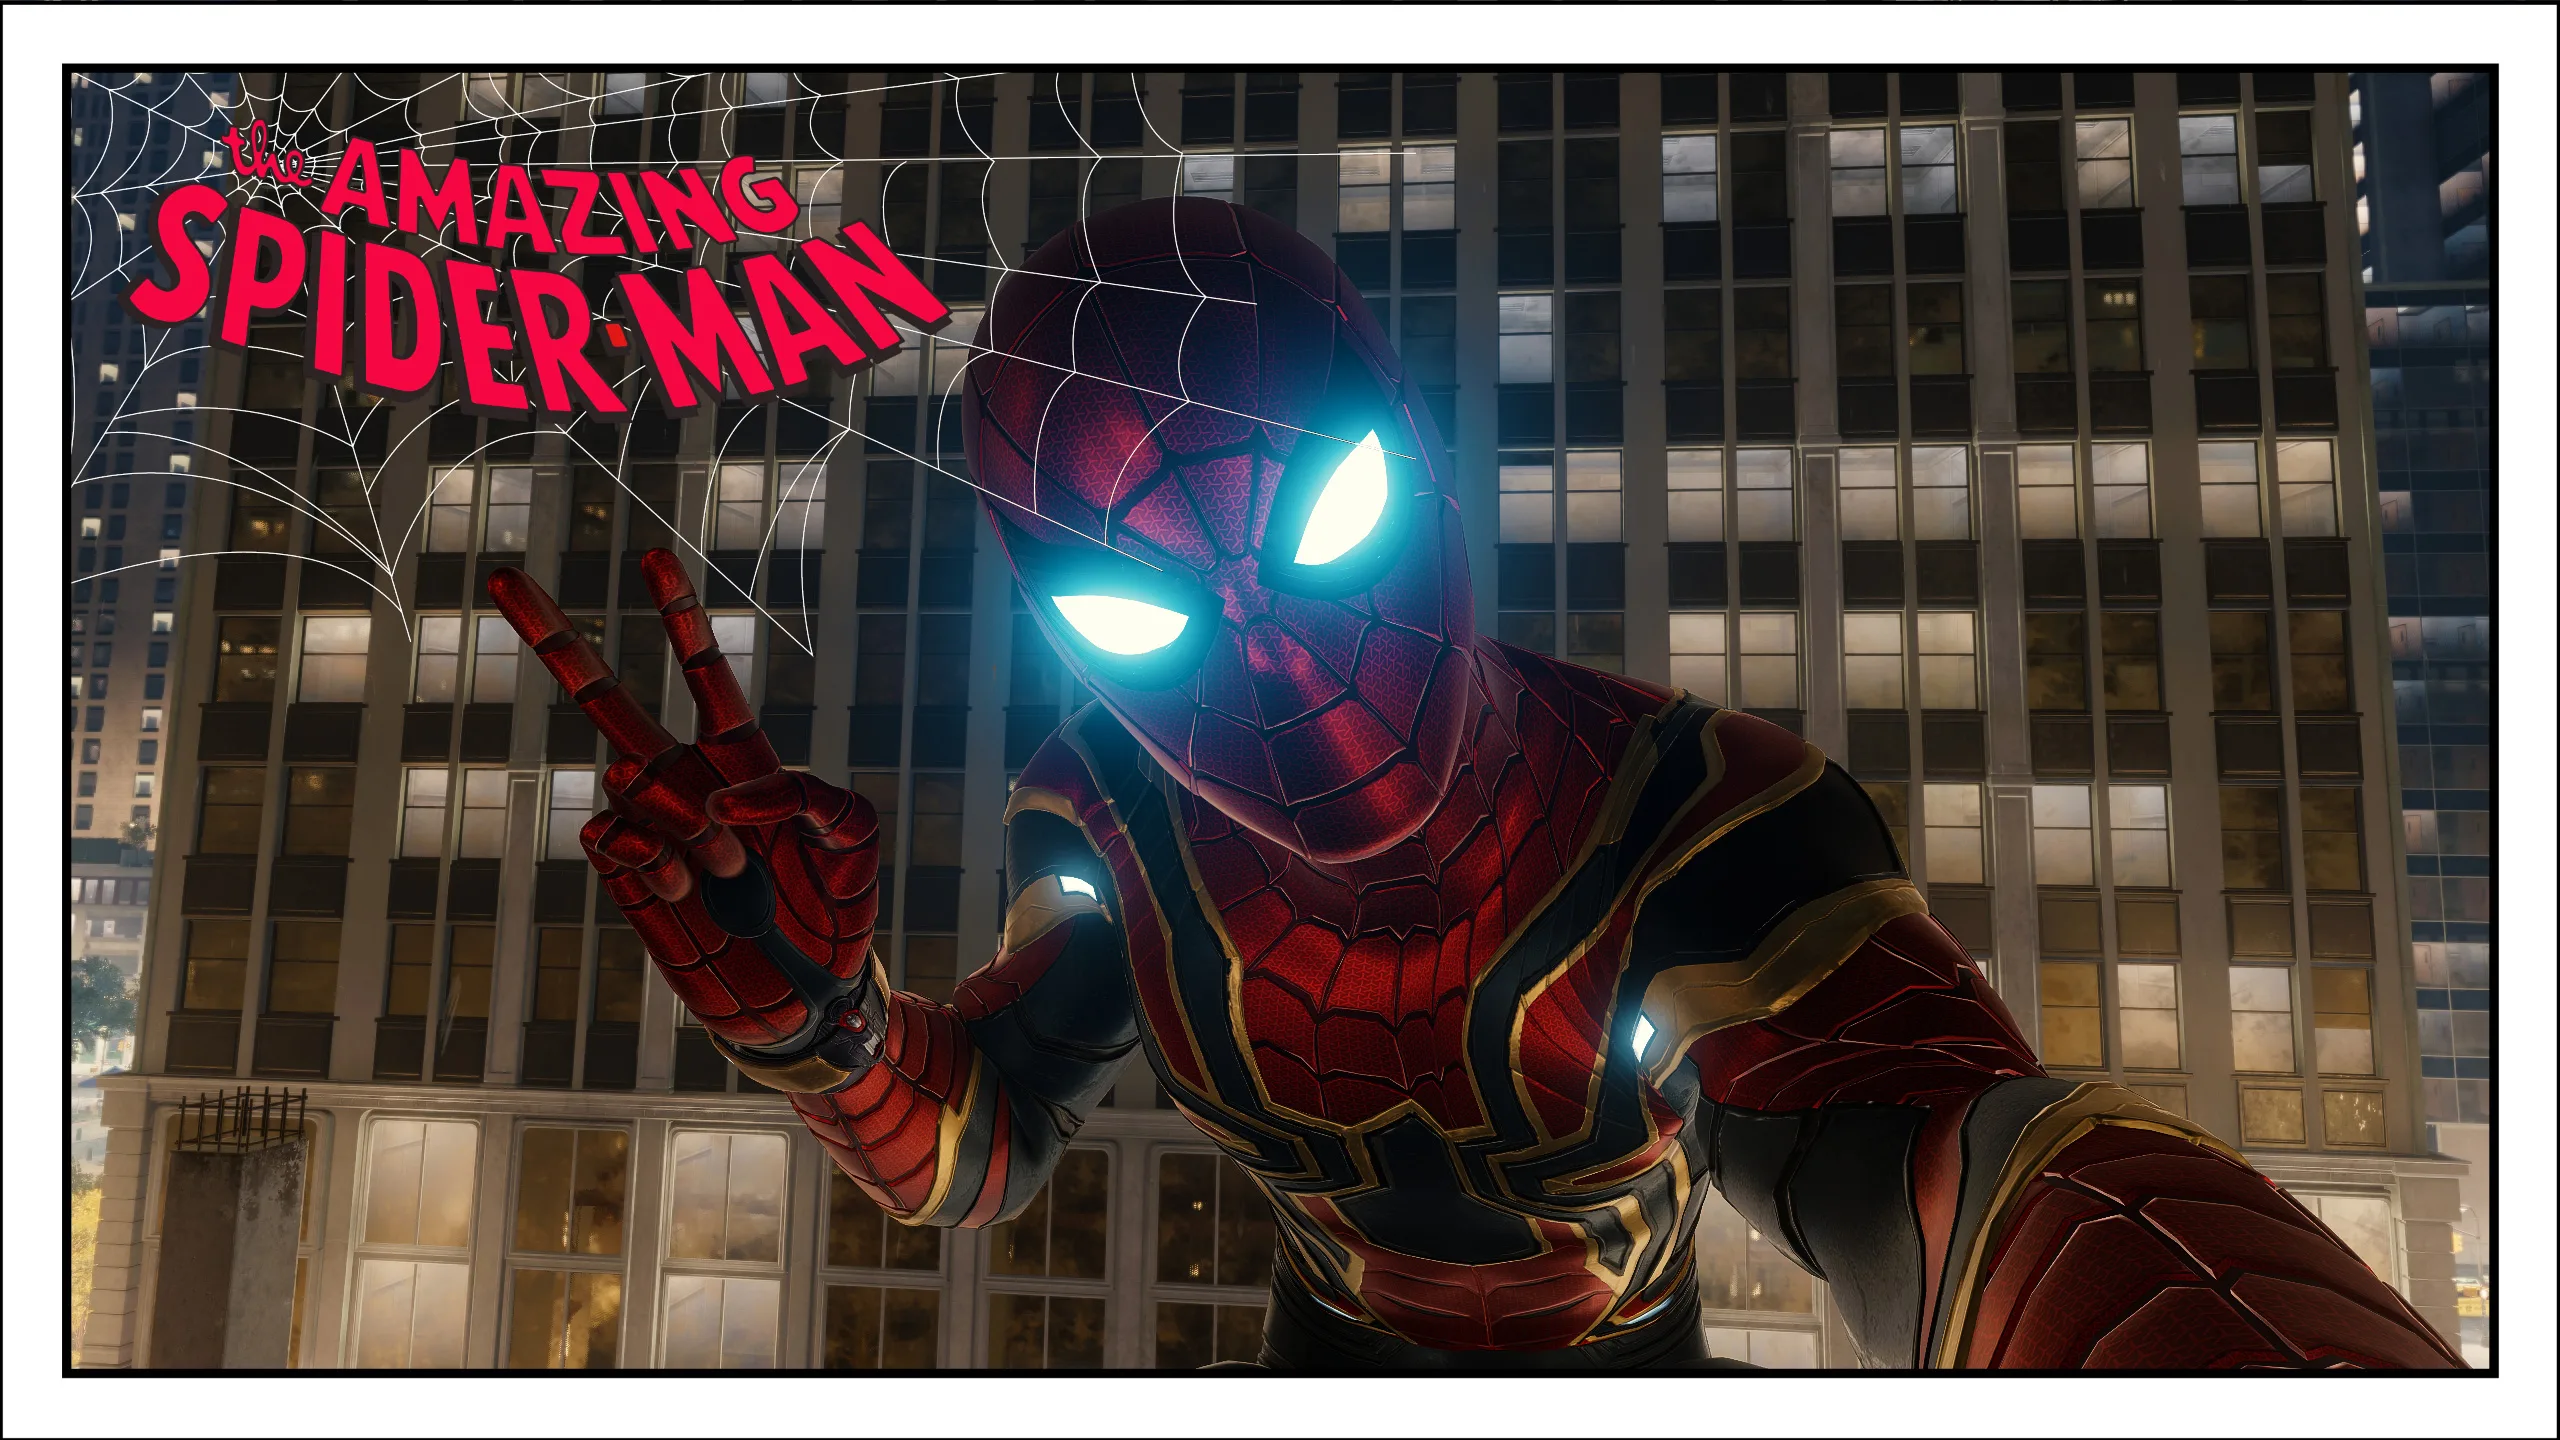 Marvel's Spider-Man Remastered Reviews, Pros and Cons